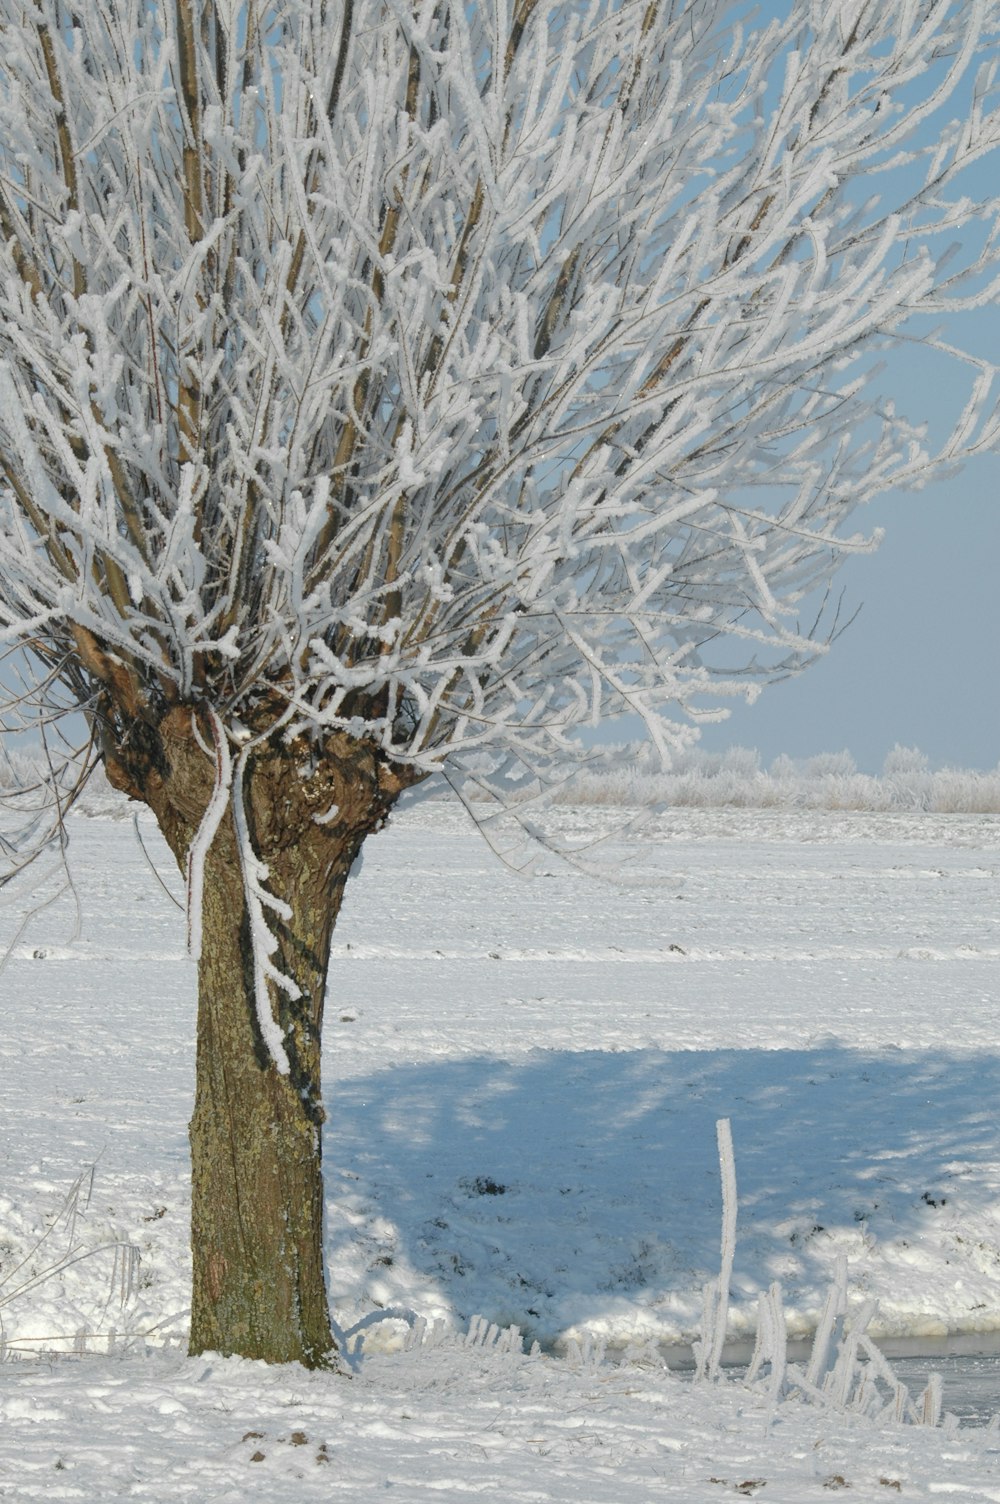 a snow covered tree in the middle of a snowy field